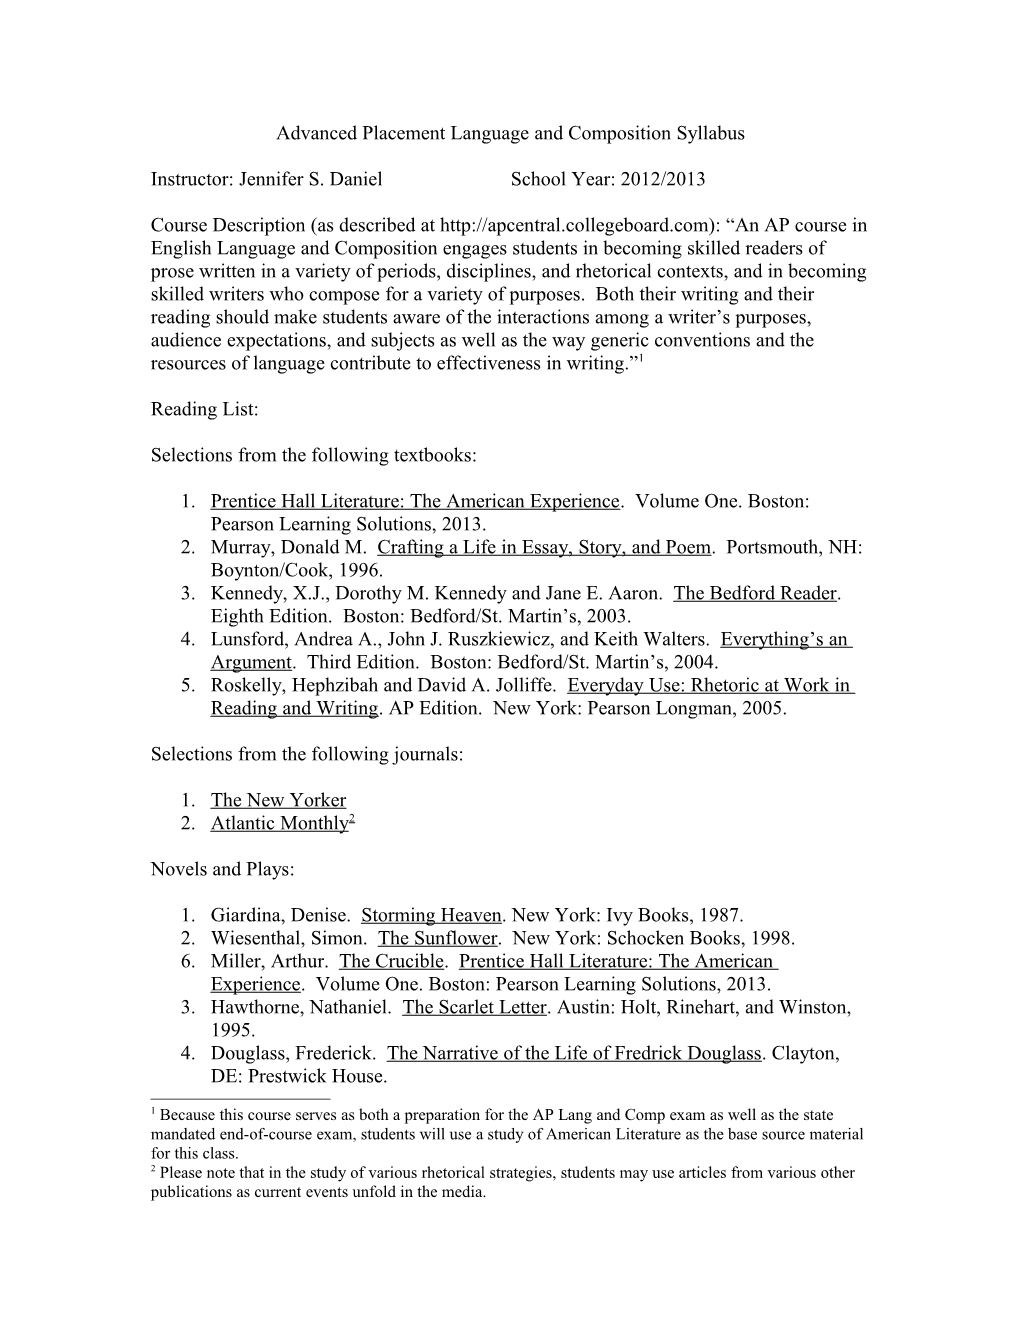 Advanced Placement Language and Composition Syllabus